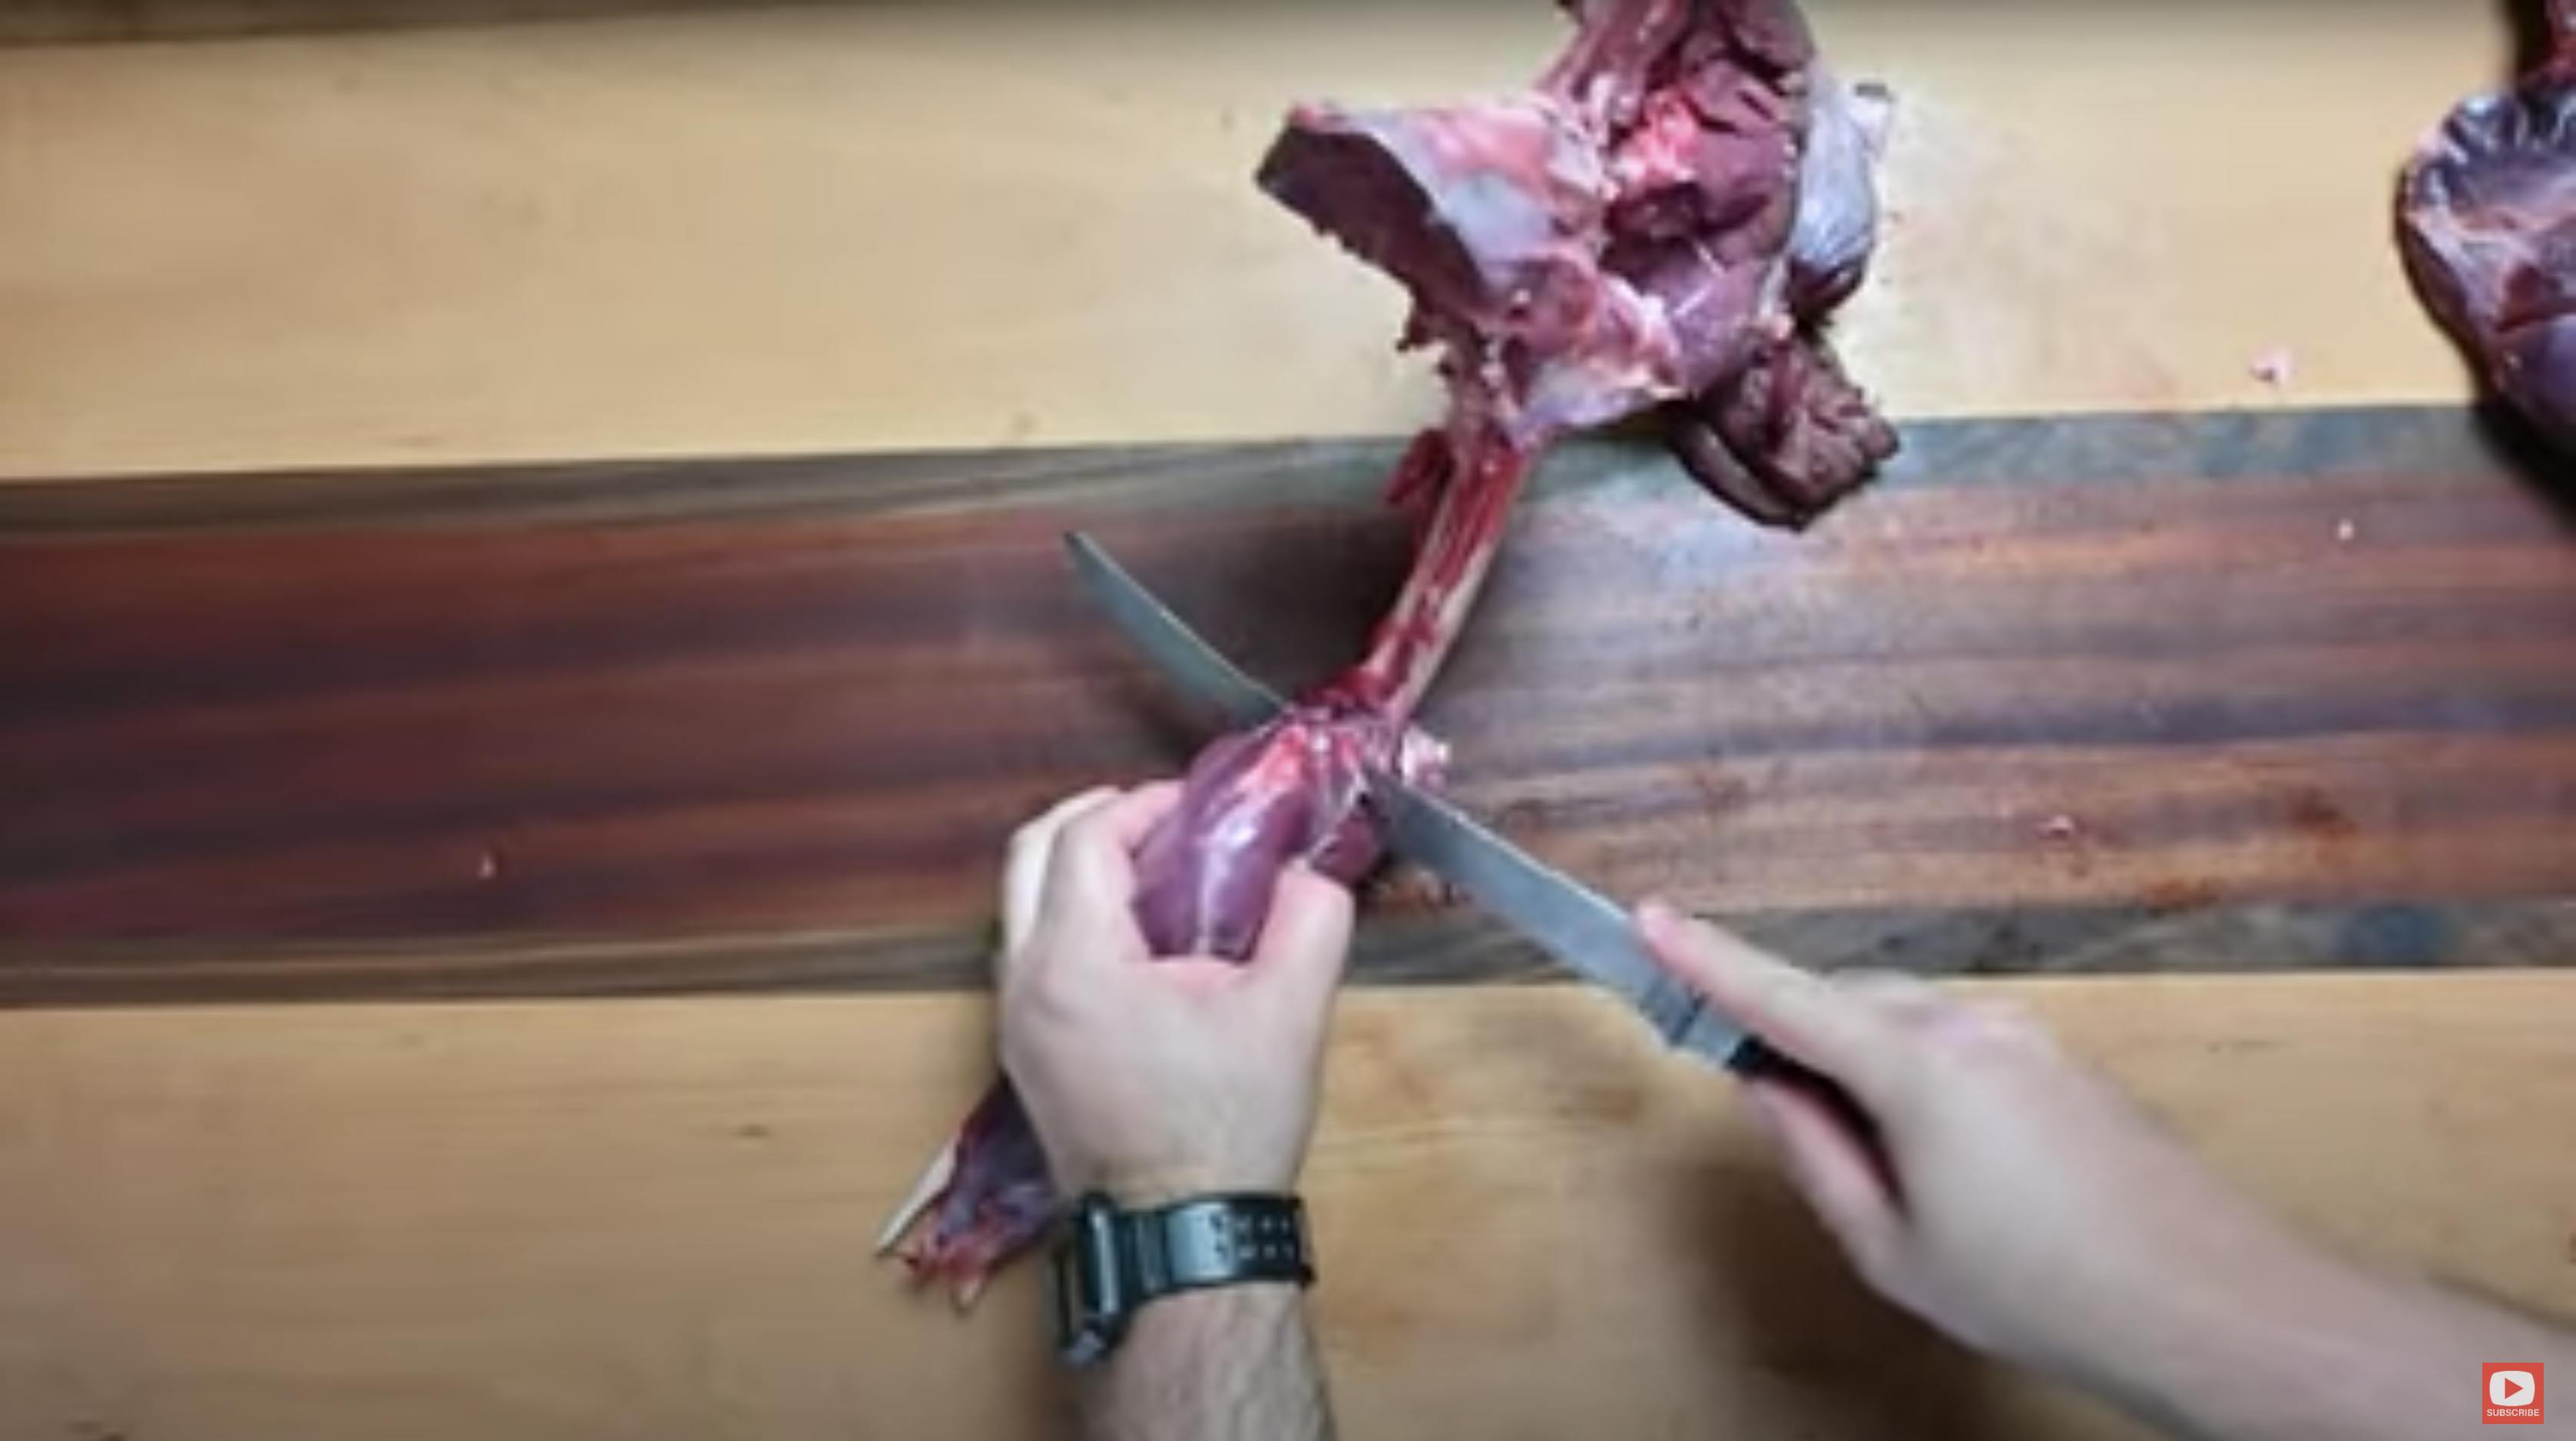 How to Remove Venison Shank